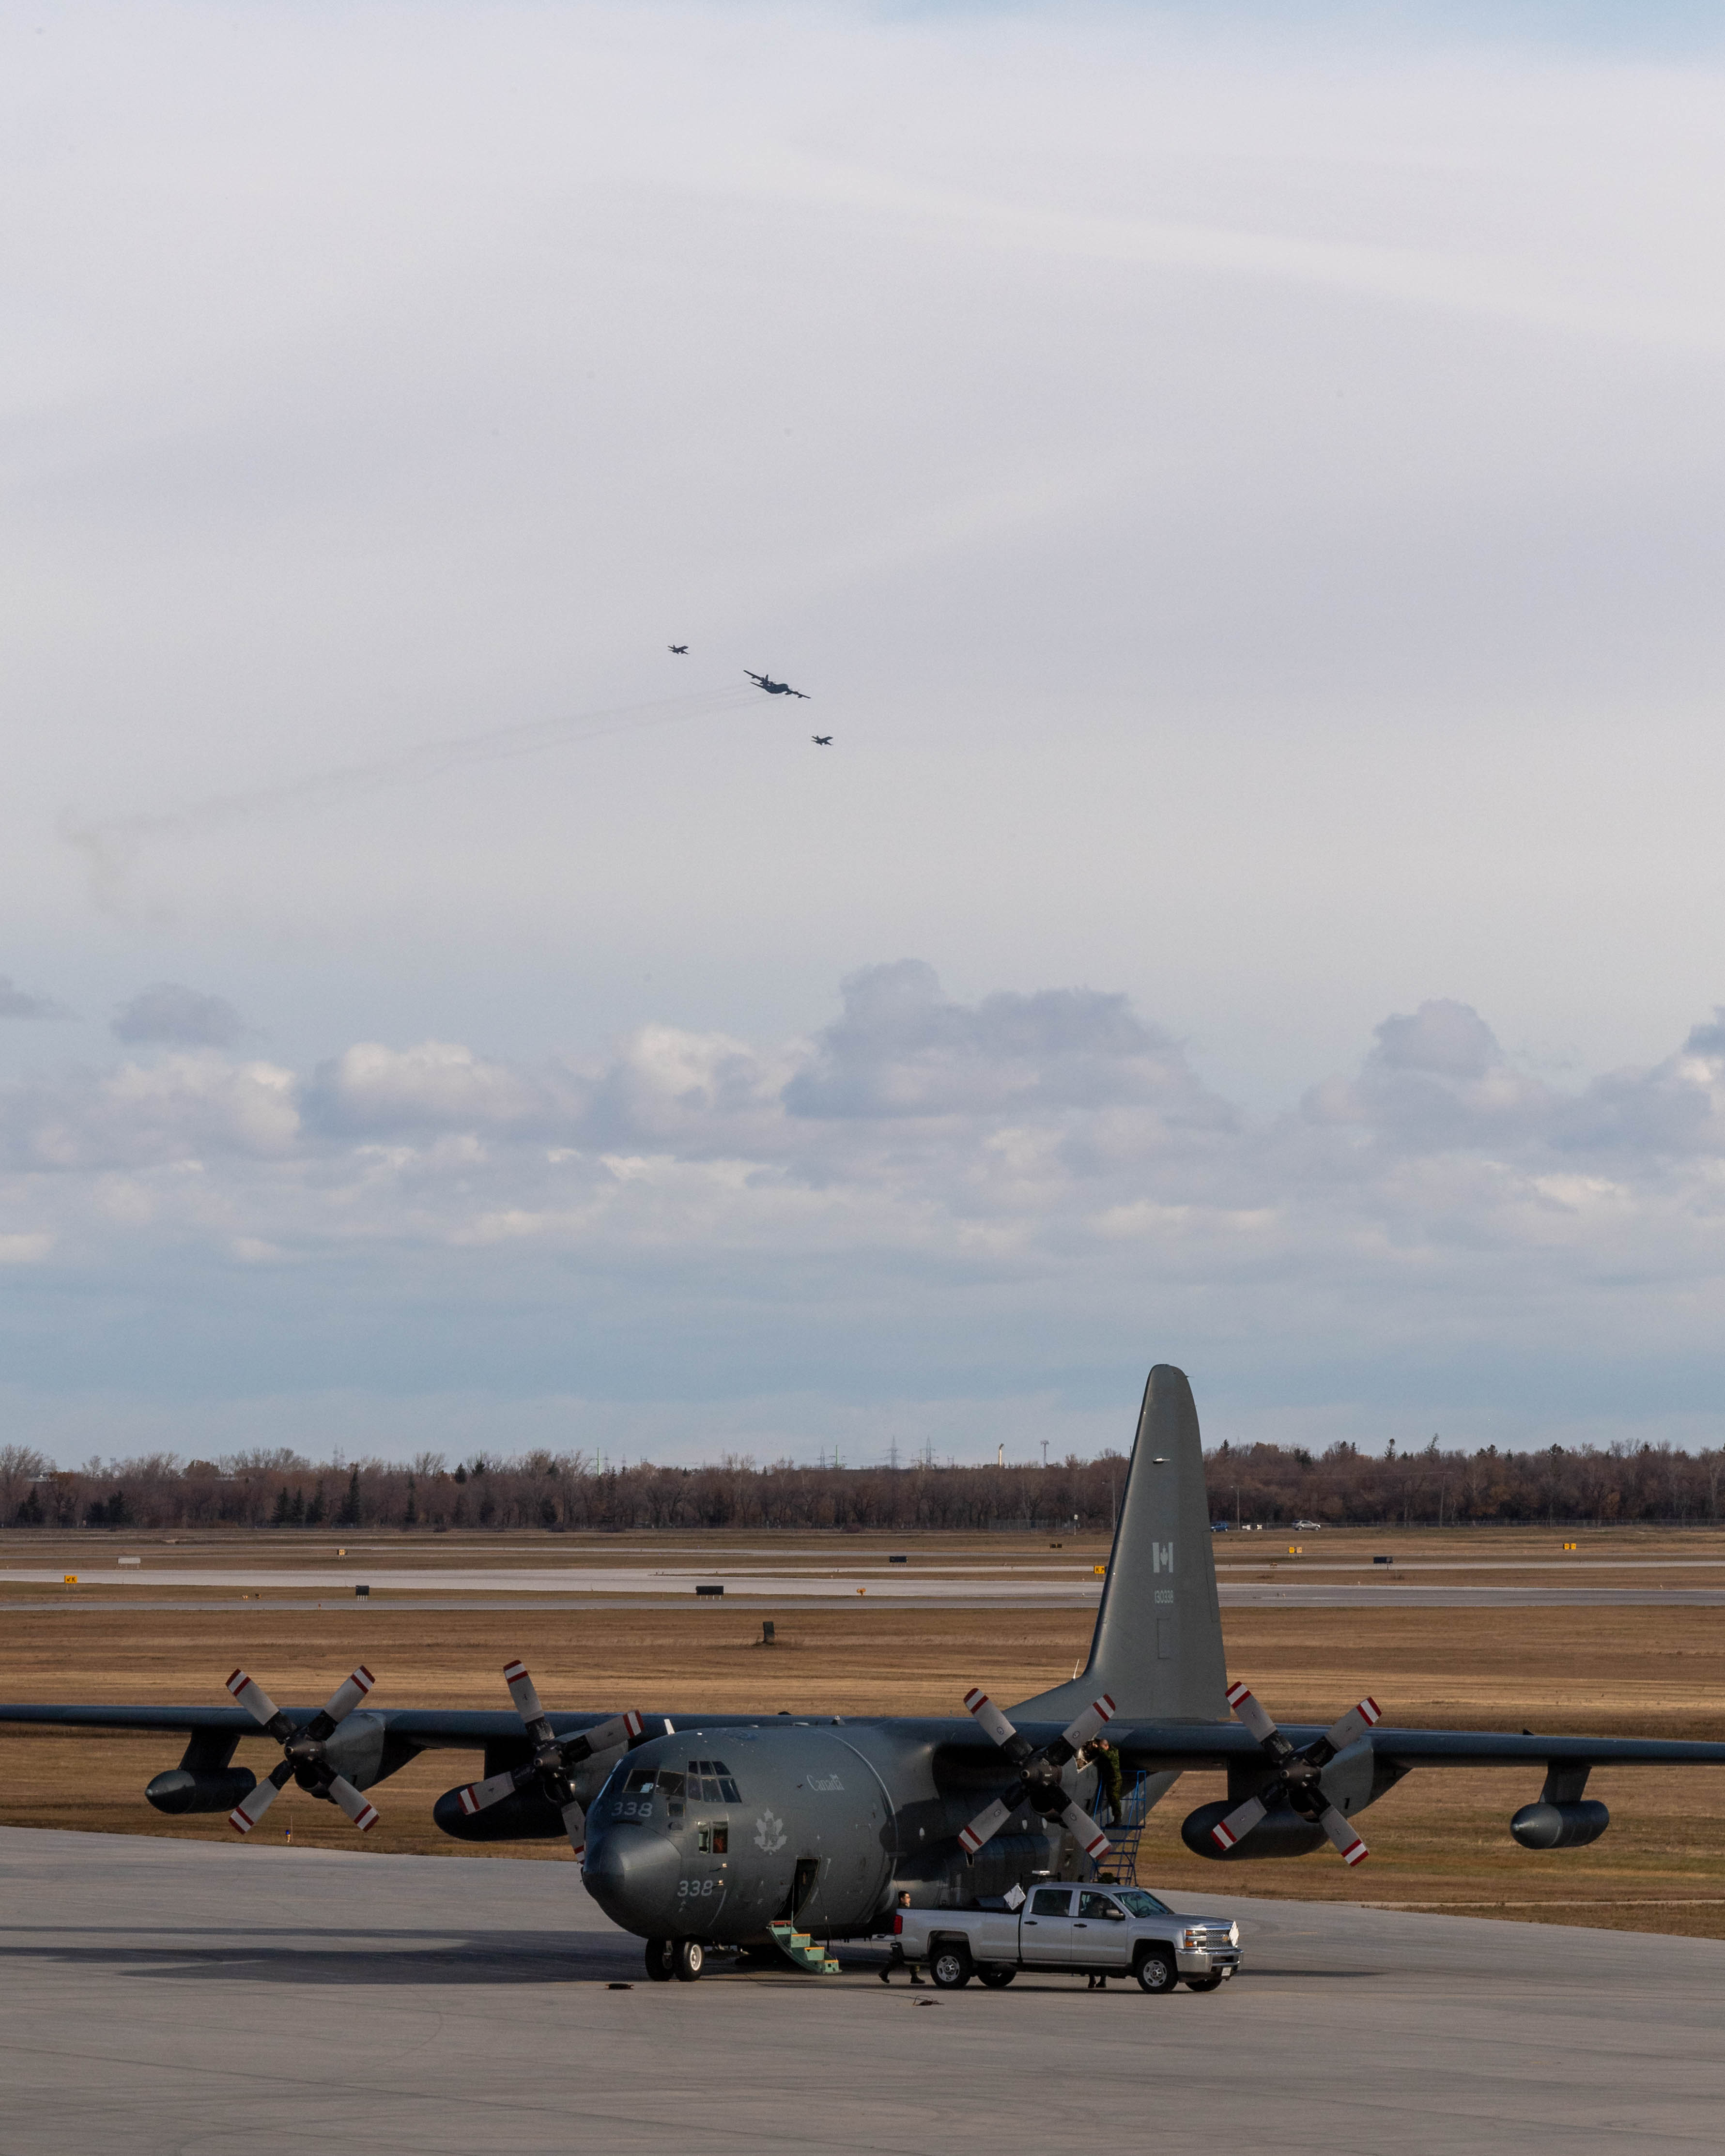 A CC-130 Hercules aircraft sits on the tarmac at 17 Wing Winnipeg, Manitoba, on October 13, 2020, while another Hercules flies above in formation with two CF-188 Hornet fighter aircraft to mark the 60th year of service of the aircraft in the Royal Canadian Air Force. PHOTO: Corporal Darryl Hepner